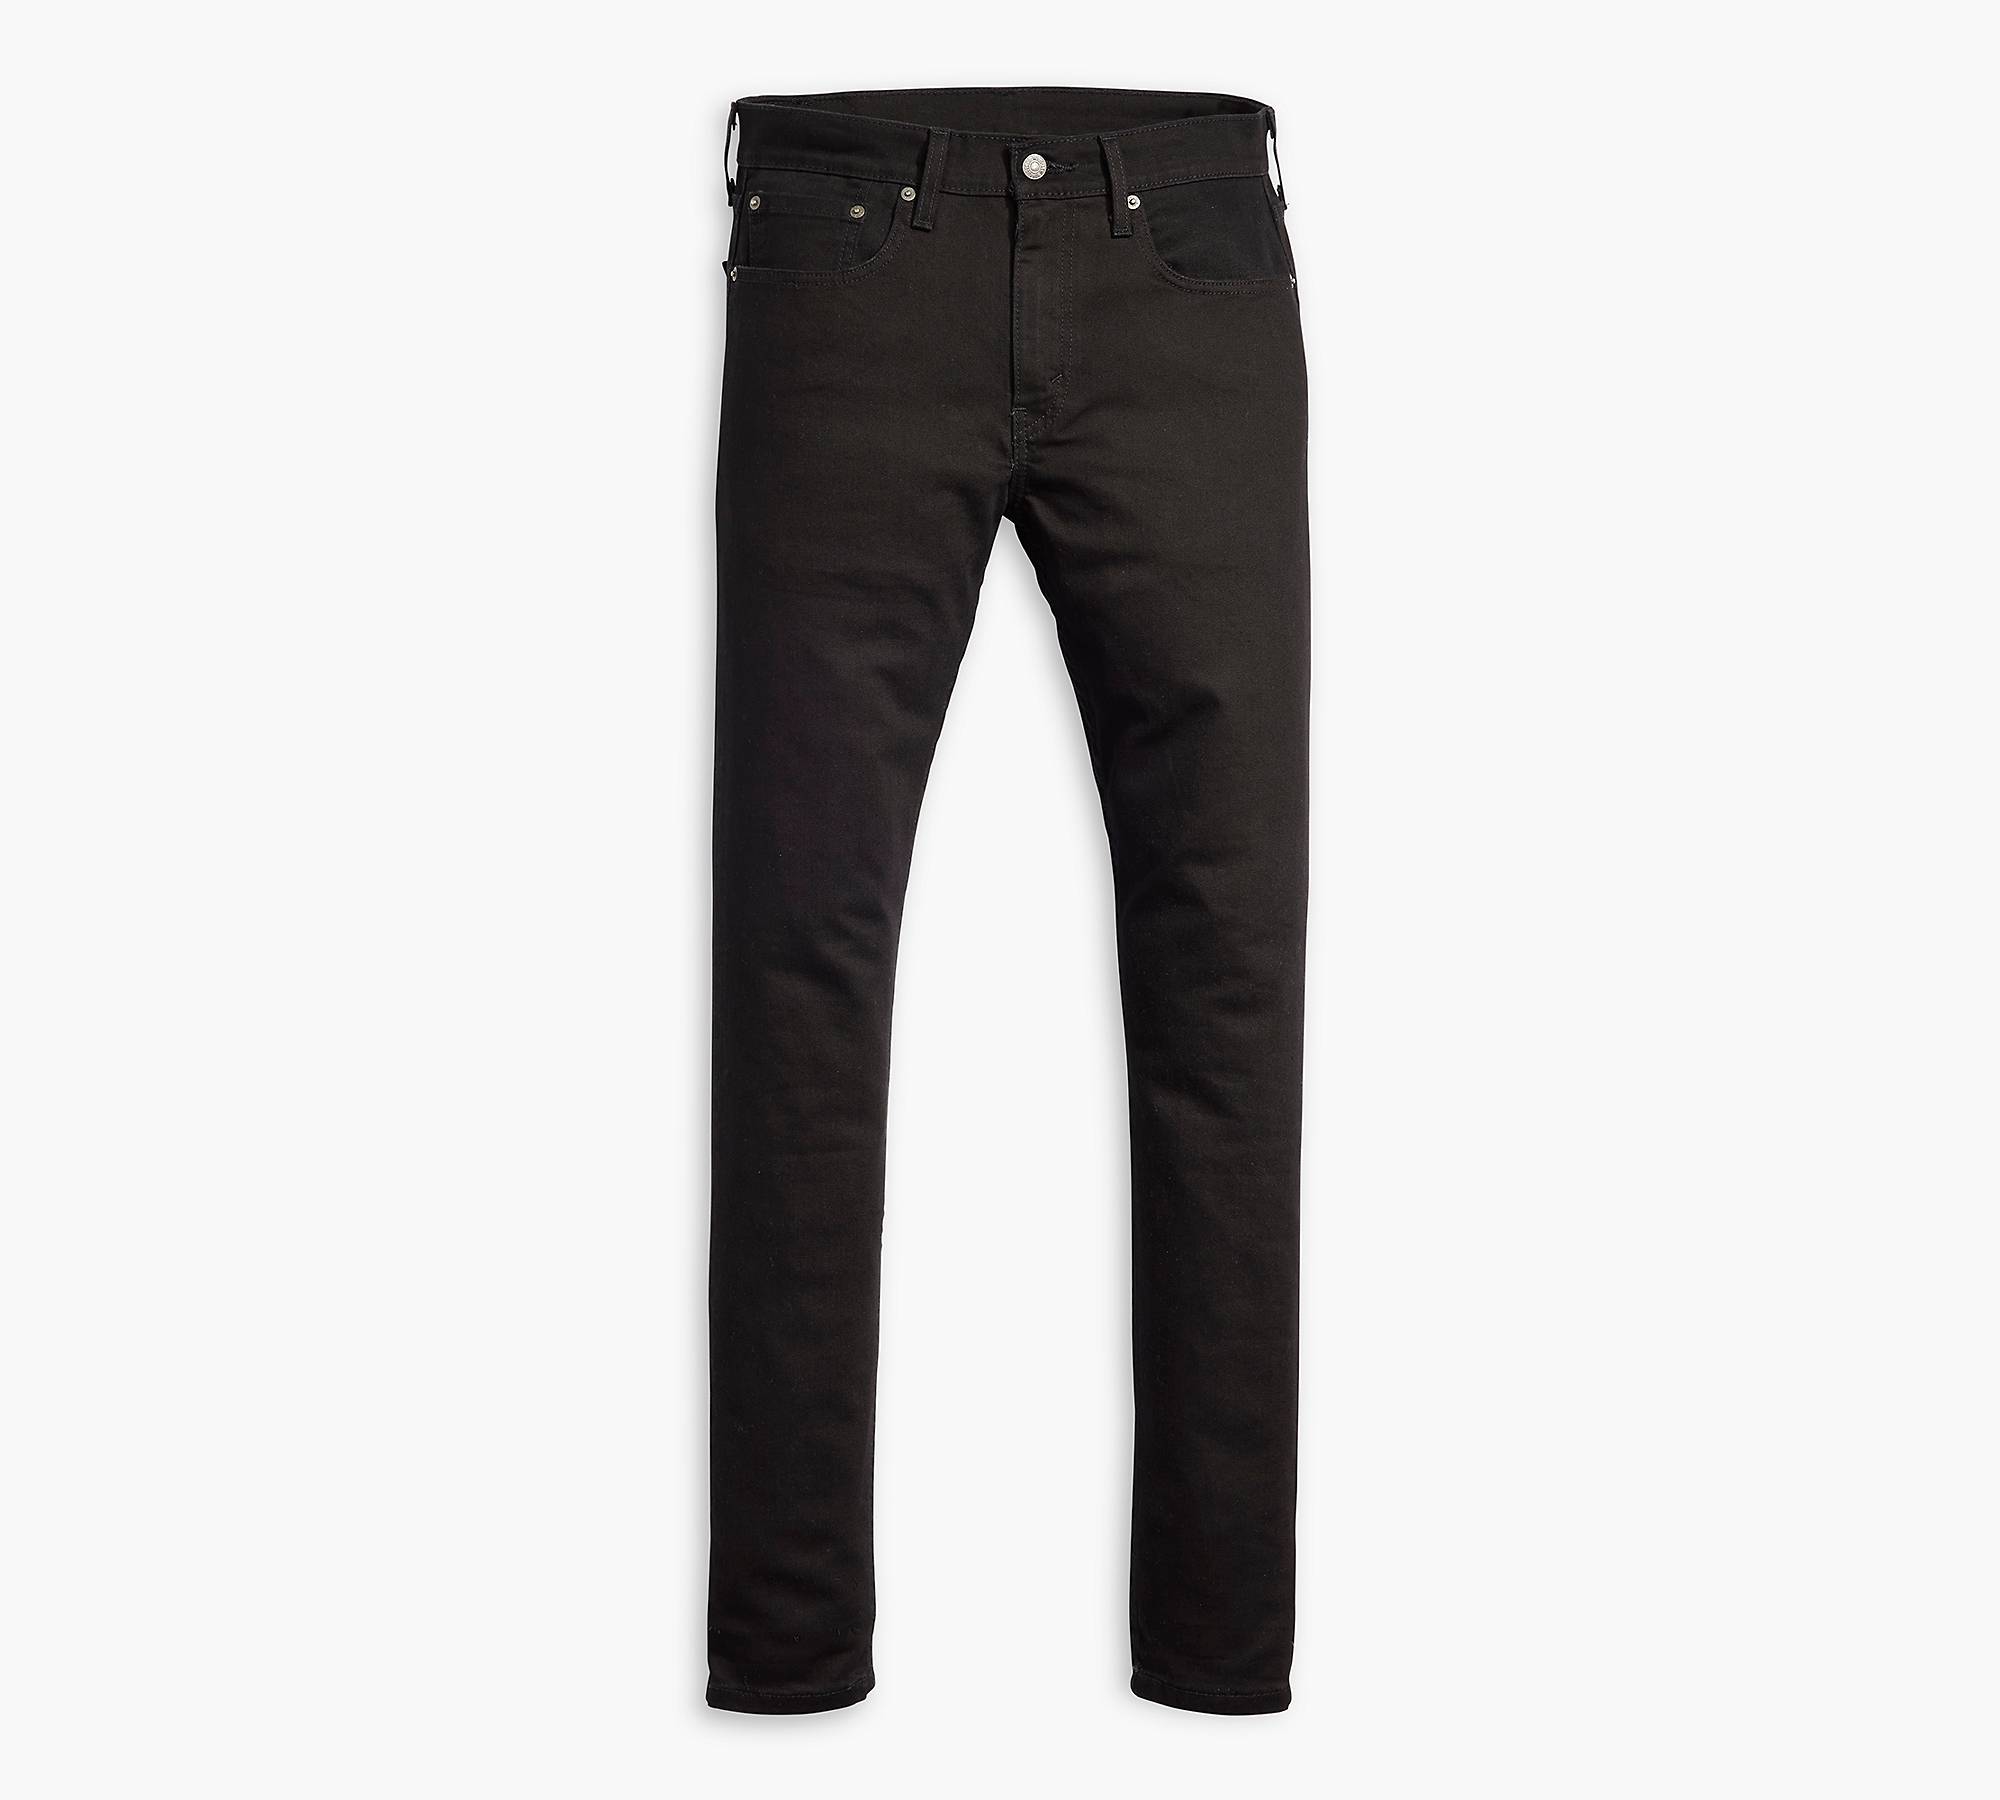 Black men jeans offer a versatile and timeless option that can be dressed up or down for various occasions.